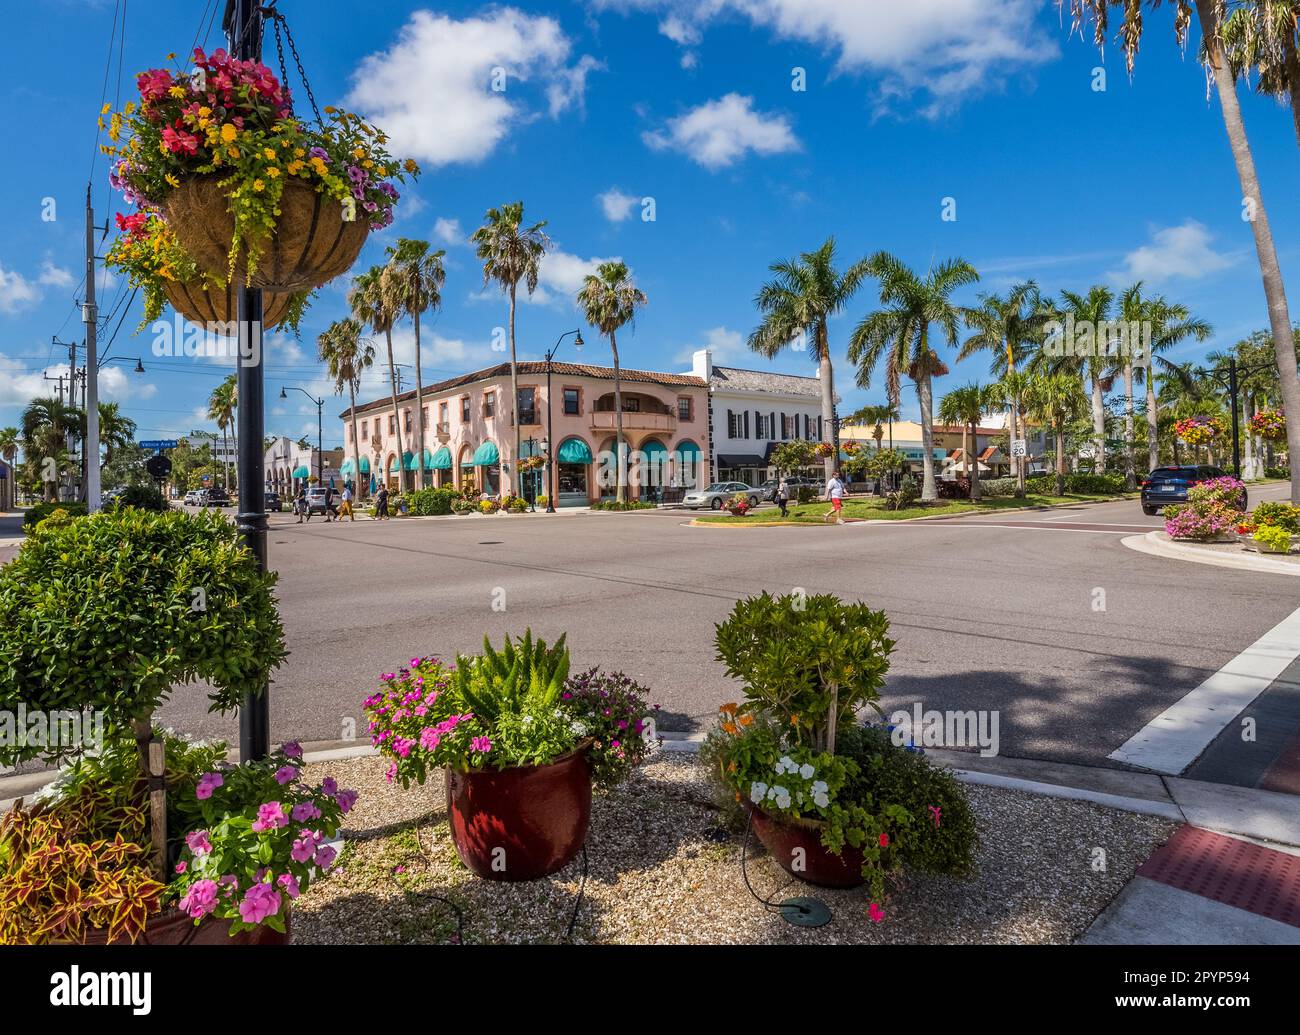 Early morning on West Venice Avenue in the city of Venice on the Gulf of Mexico southwest coast of Florida USA Stock Photo